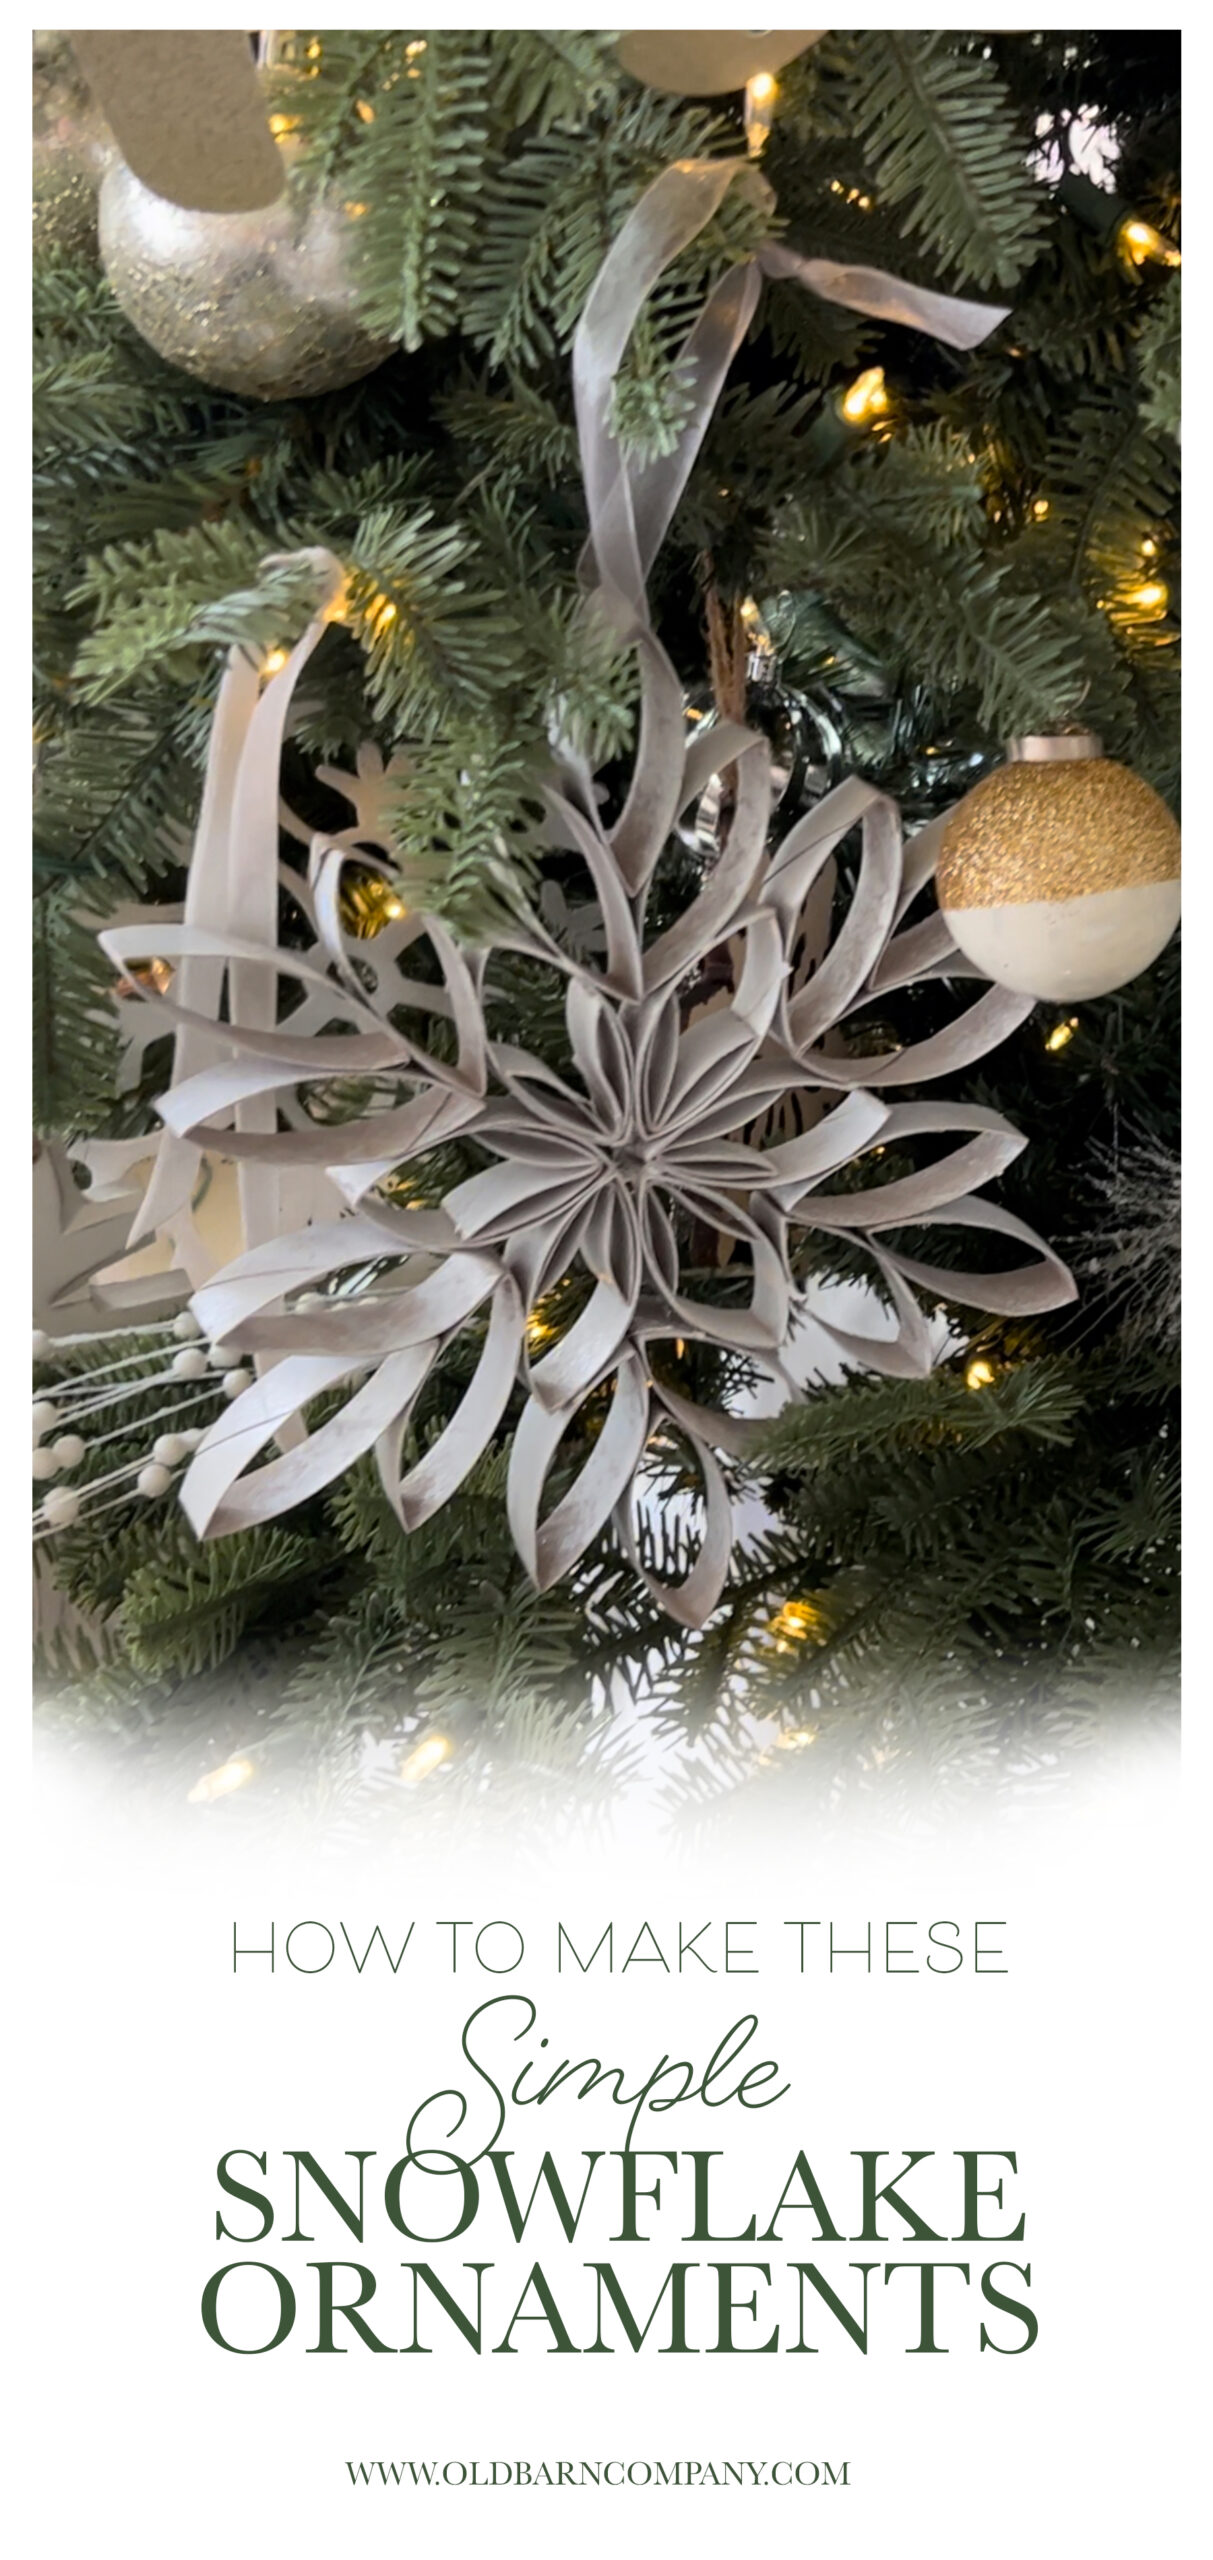 a large snowflake ornament hanging from a ribbon on a Christmas tree. The snowflake is made up cut up toilet paper rolls.